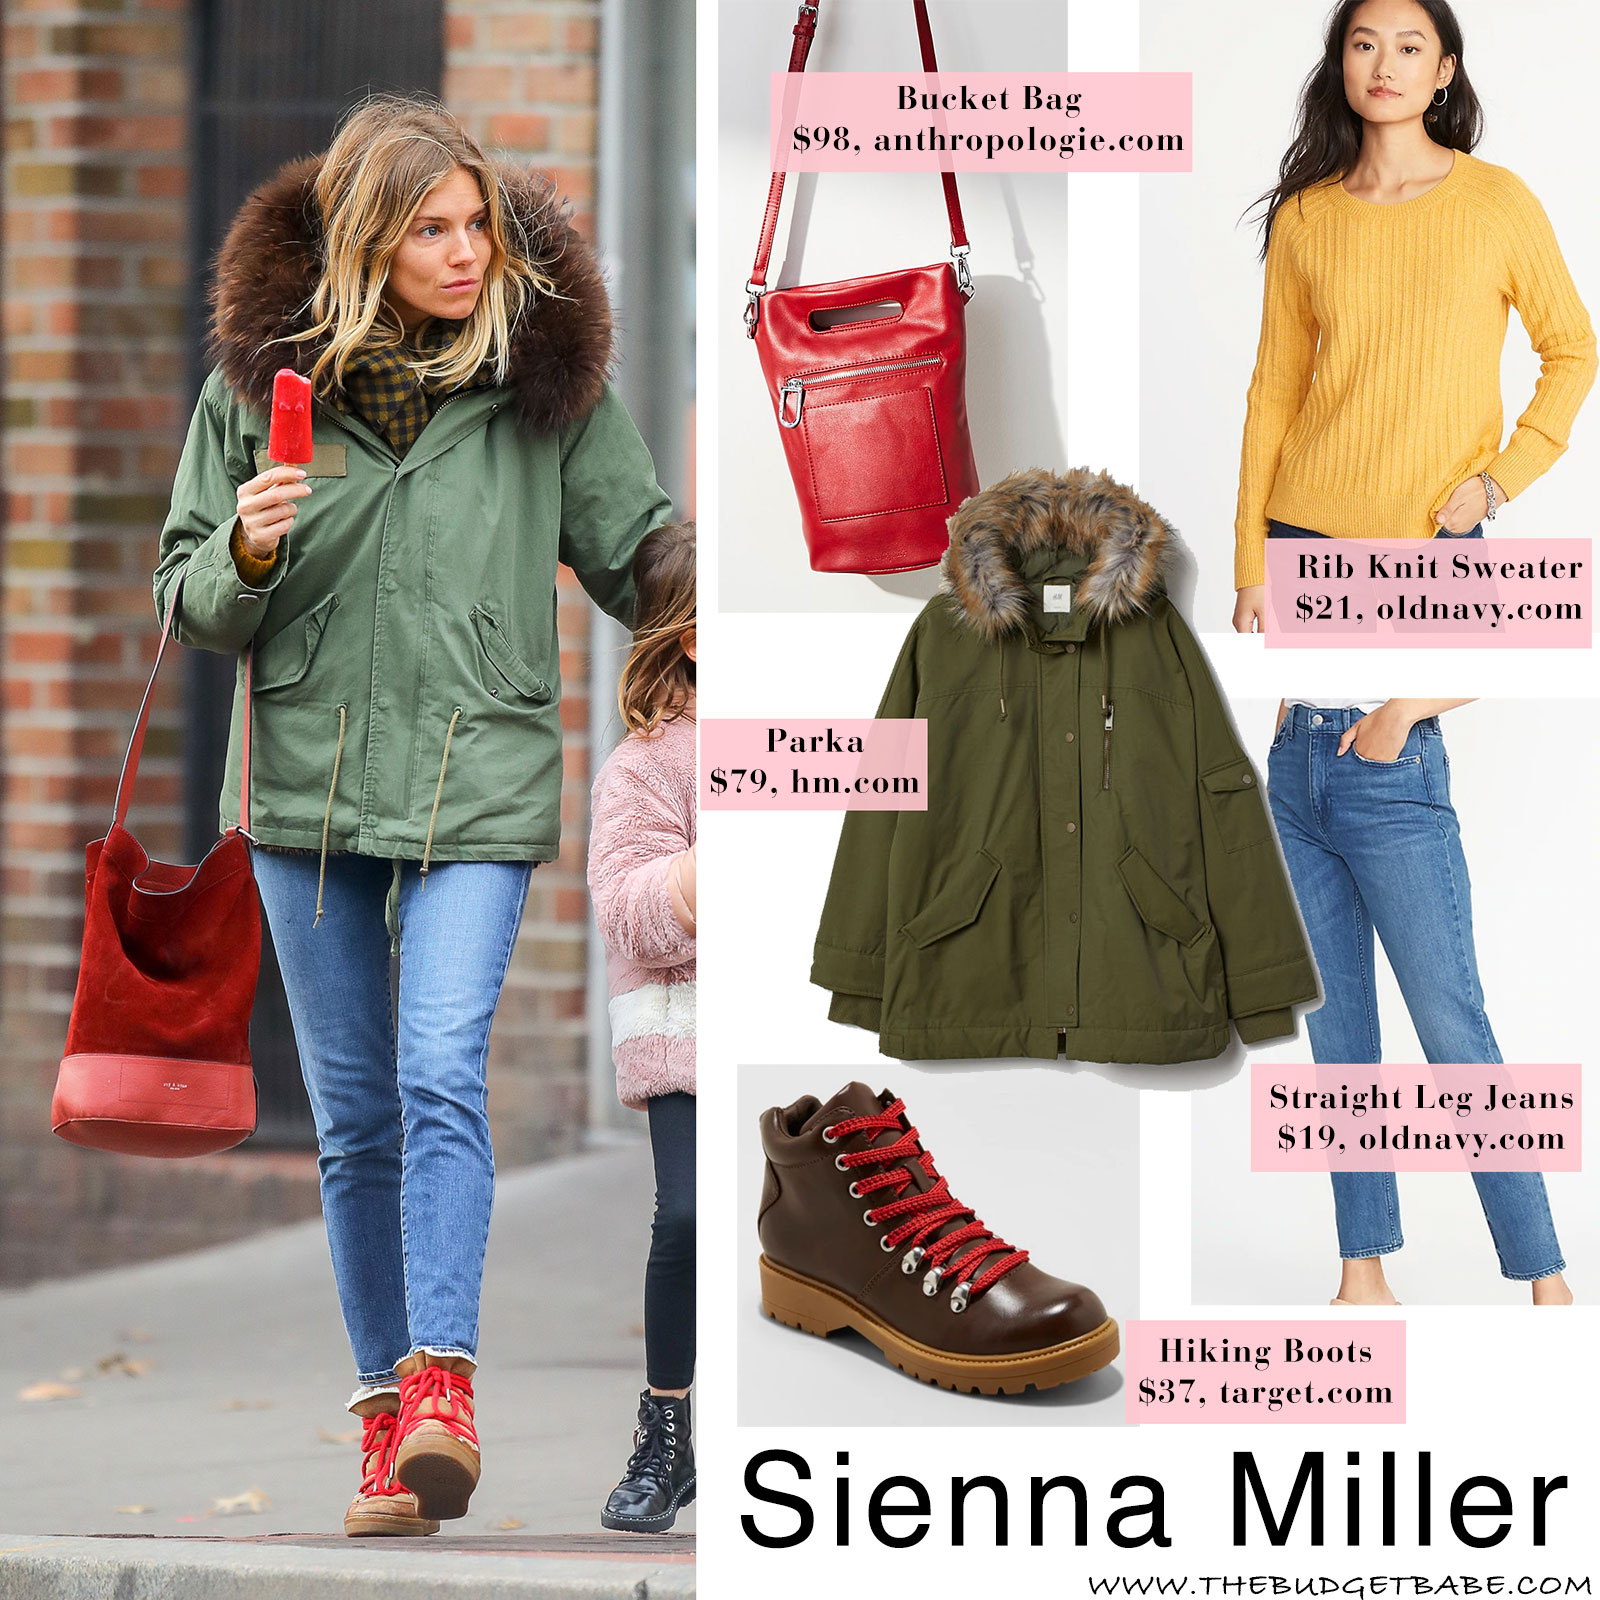 Sienna Miller's parka and Isabel Marant boots